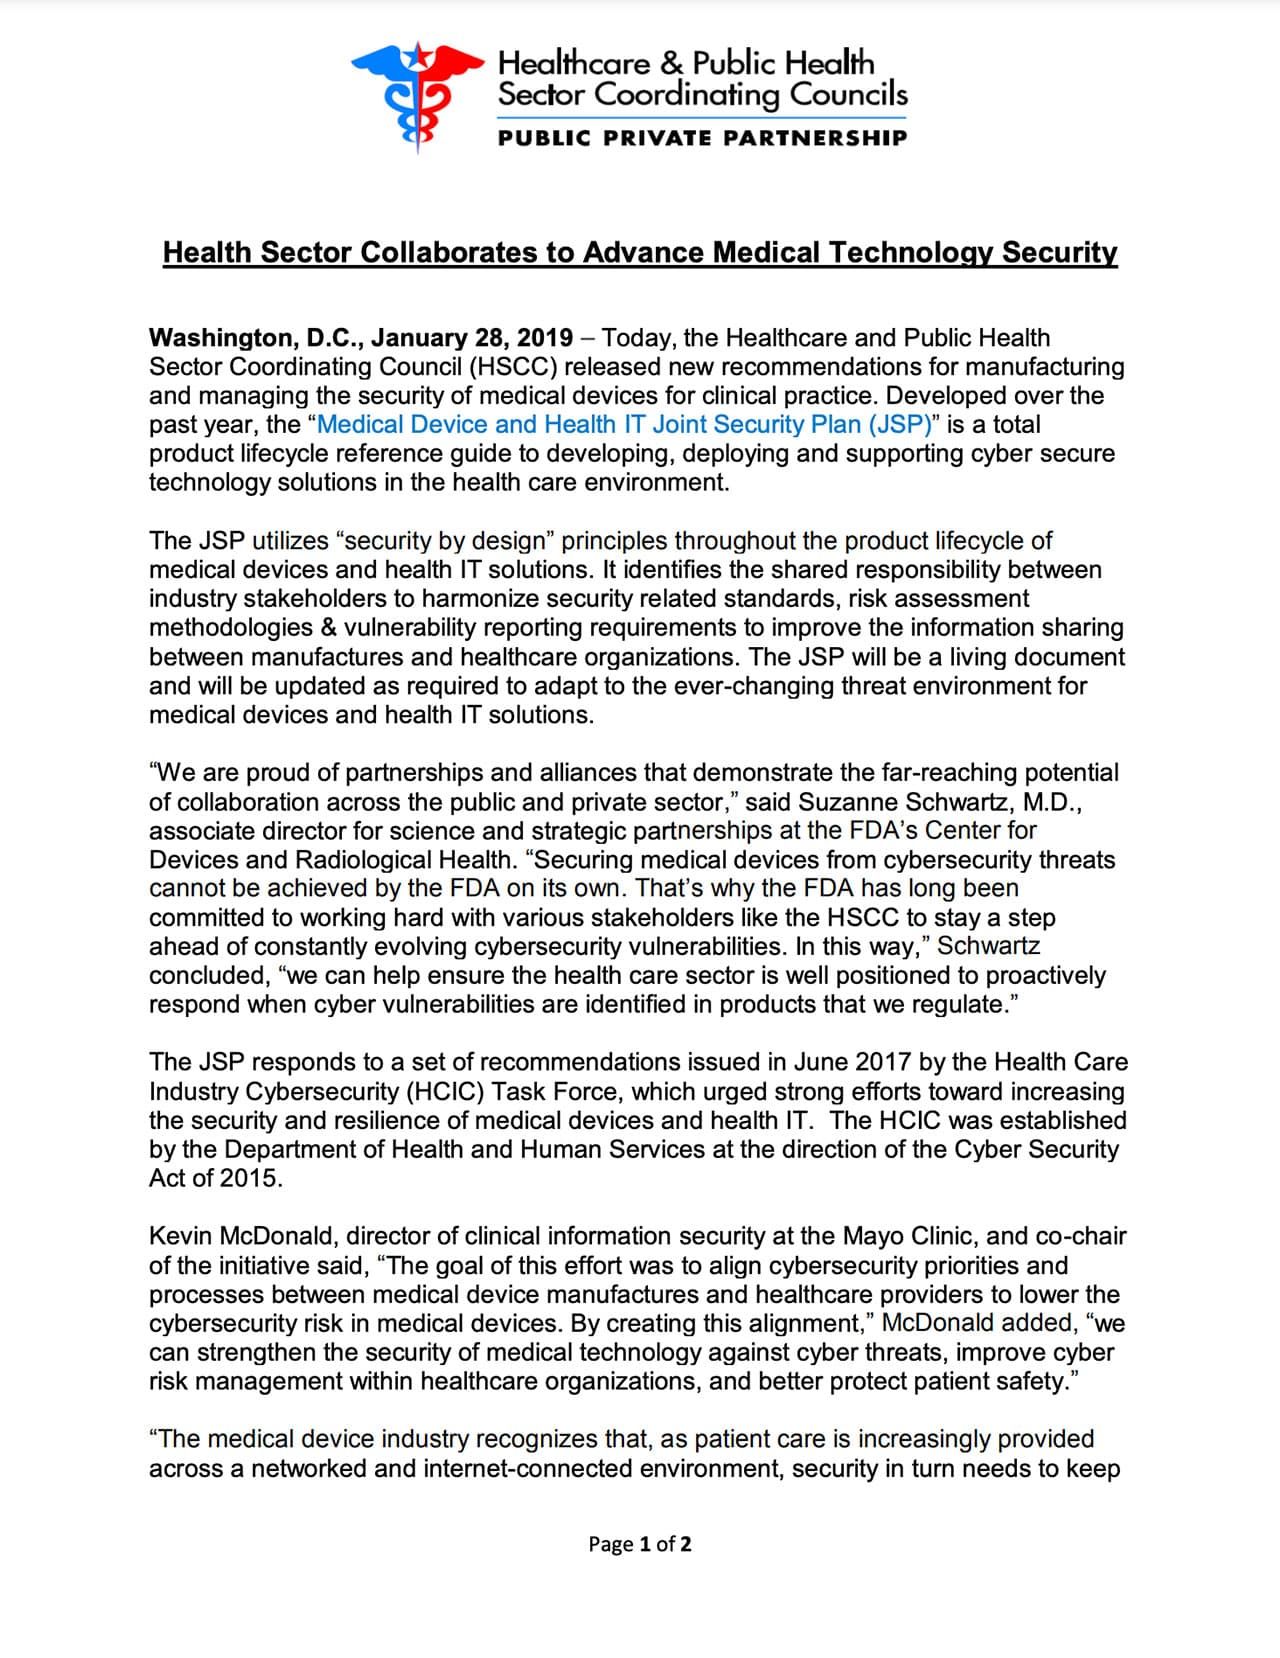 HSCC Releases the Medical Device and Health IT Joint Security Plan